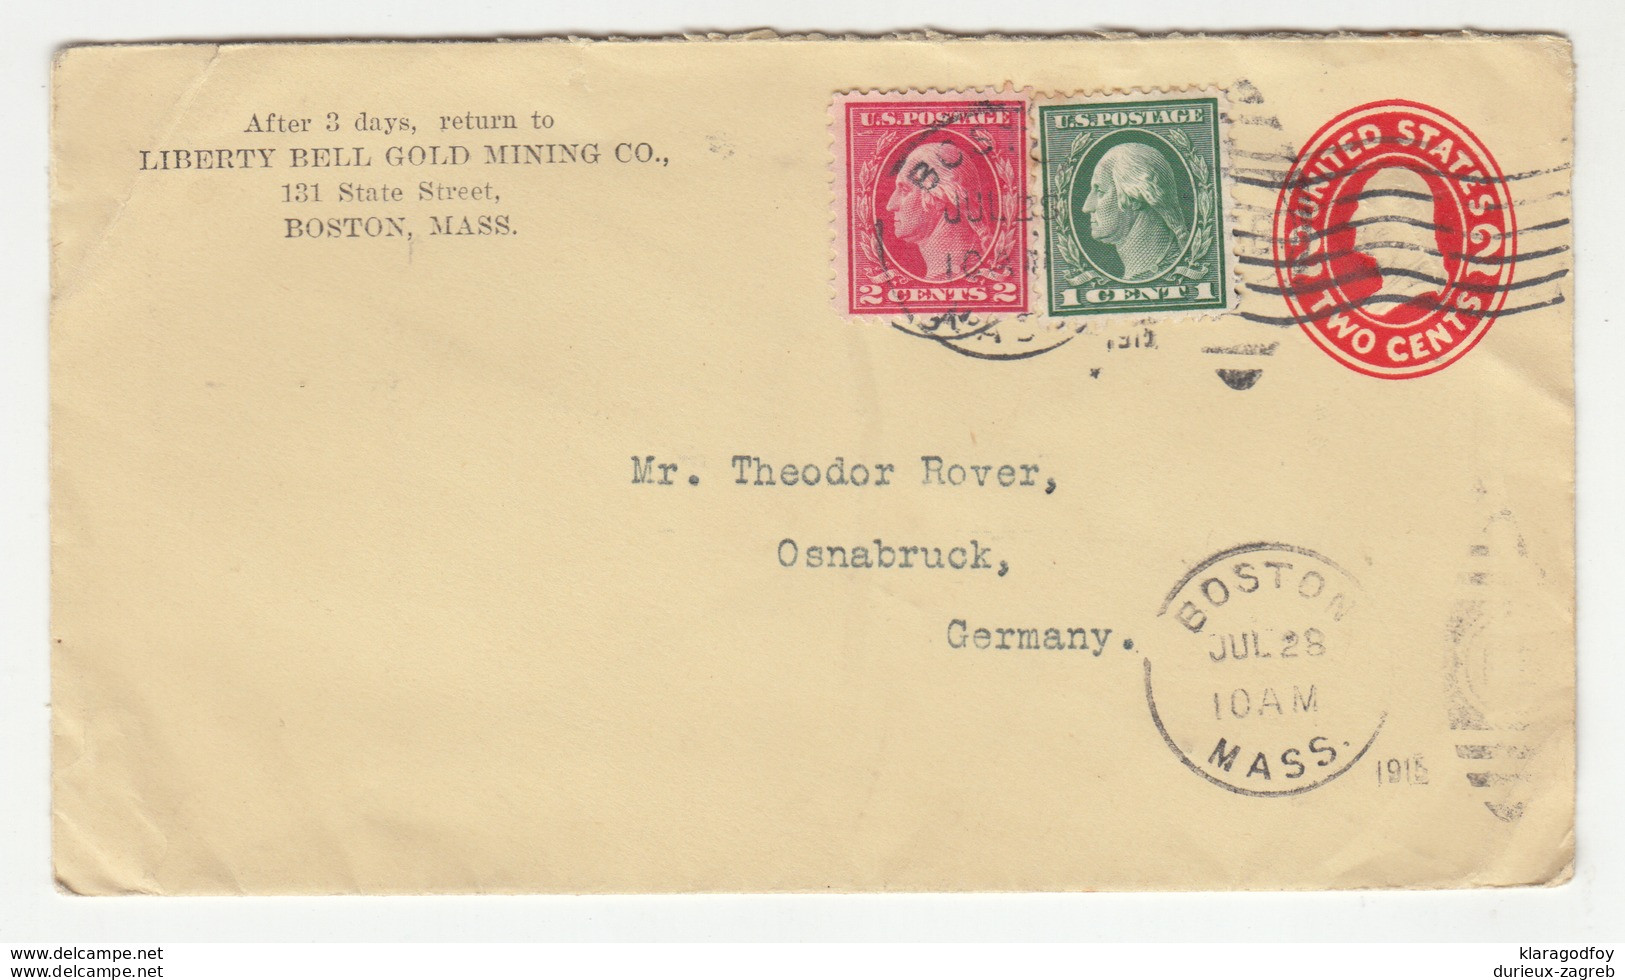 Liberty Bell Gold Mining Co., Boston Postal Stationery Letter Cover Travelled 1915? To Germany B190701 - 1901-20